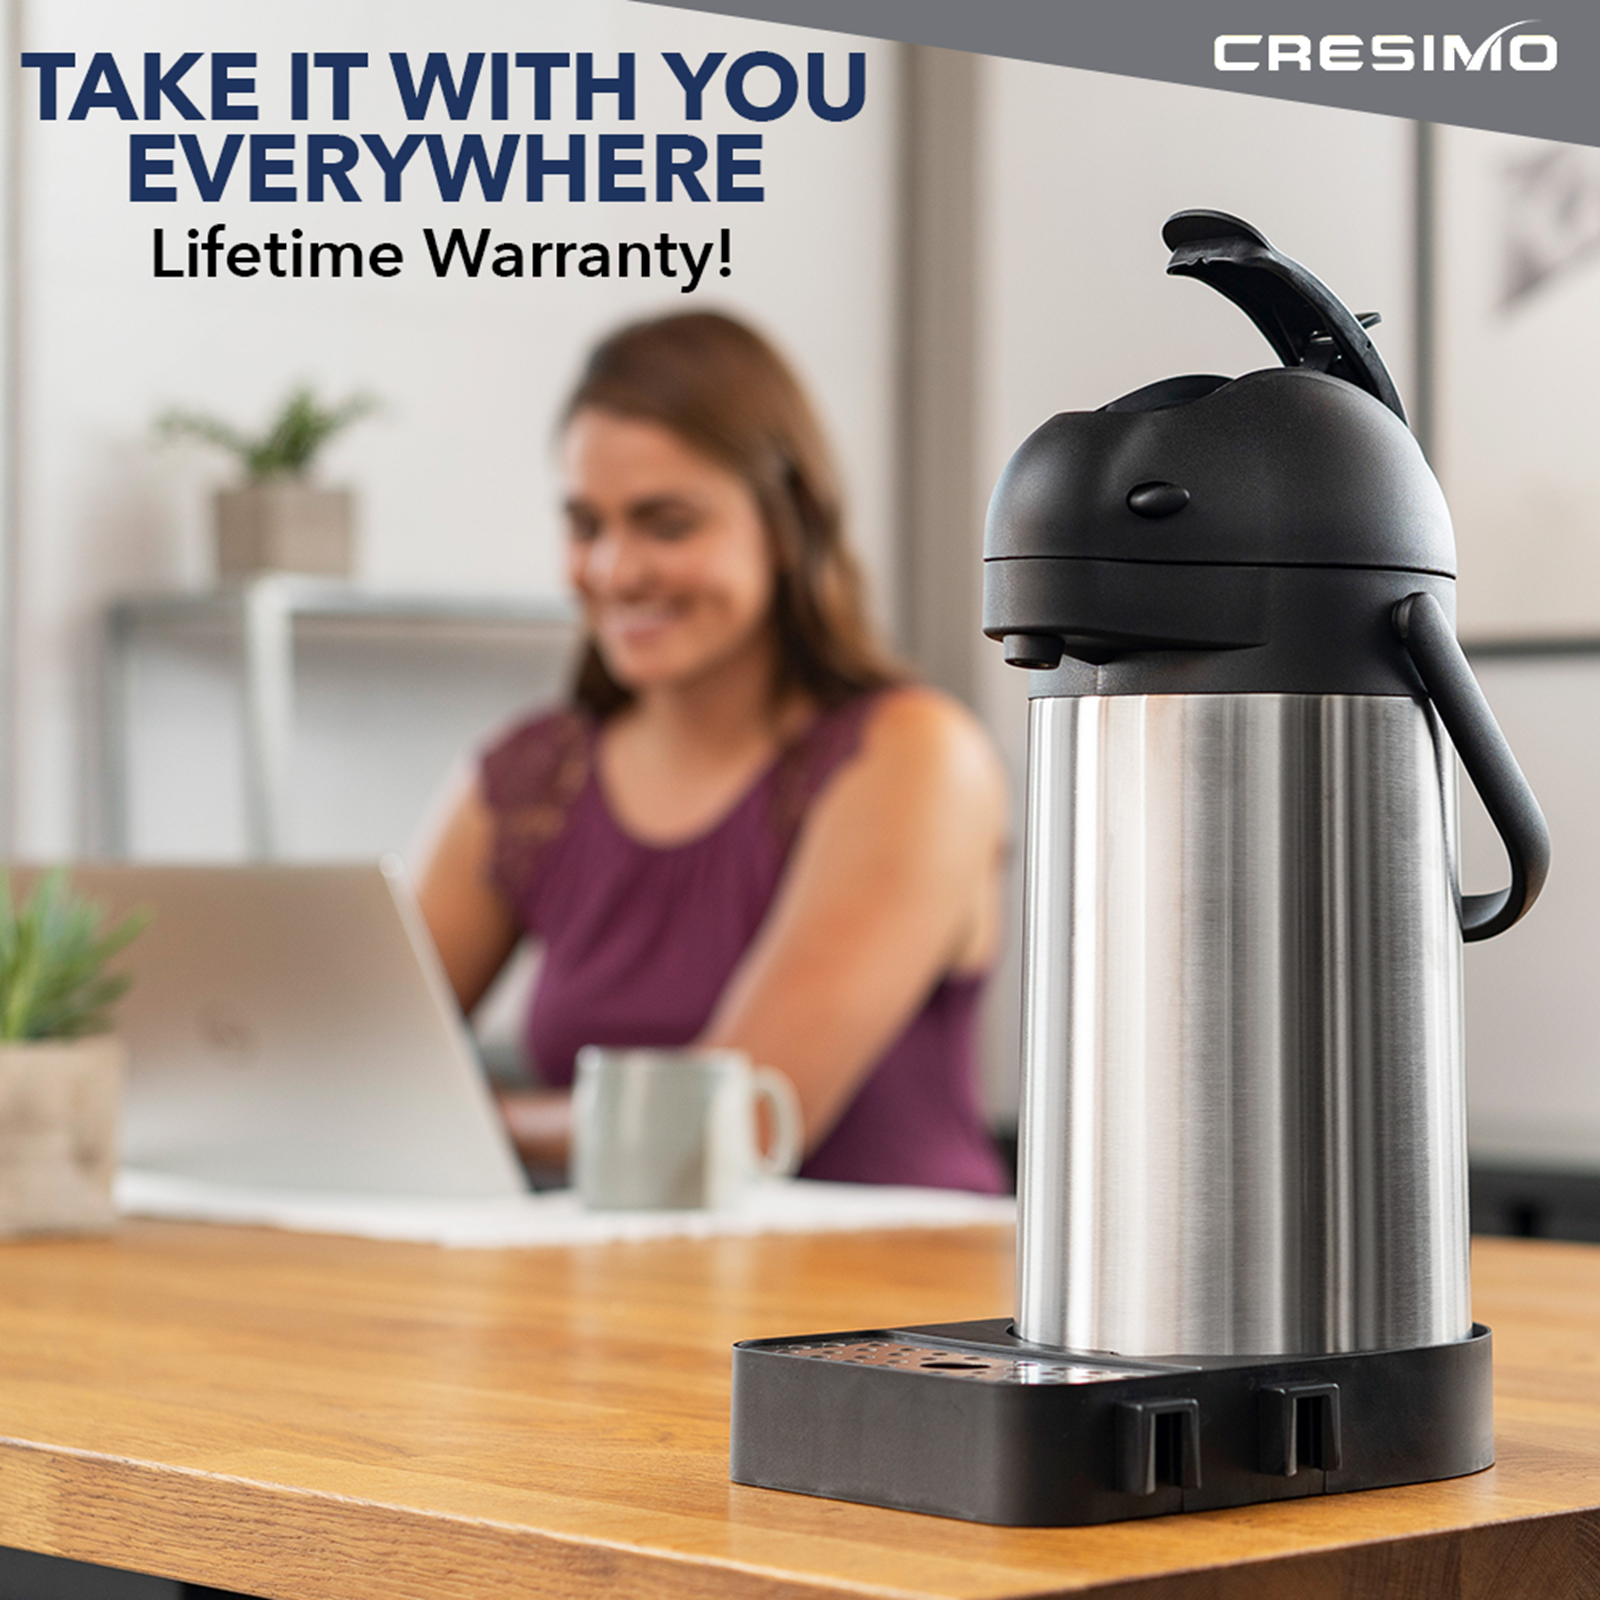 Cresimo 2 Liter Stainless Steel Thermal Coffee Carafe 